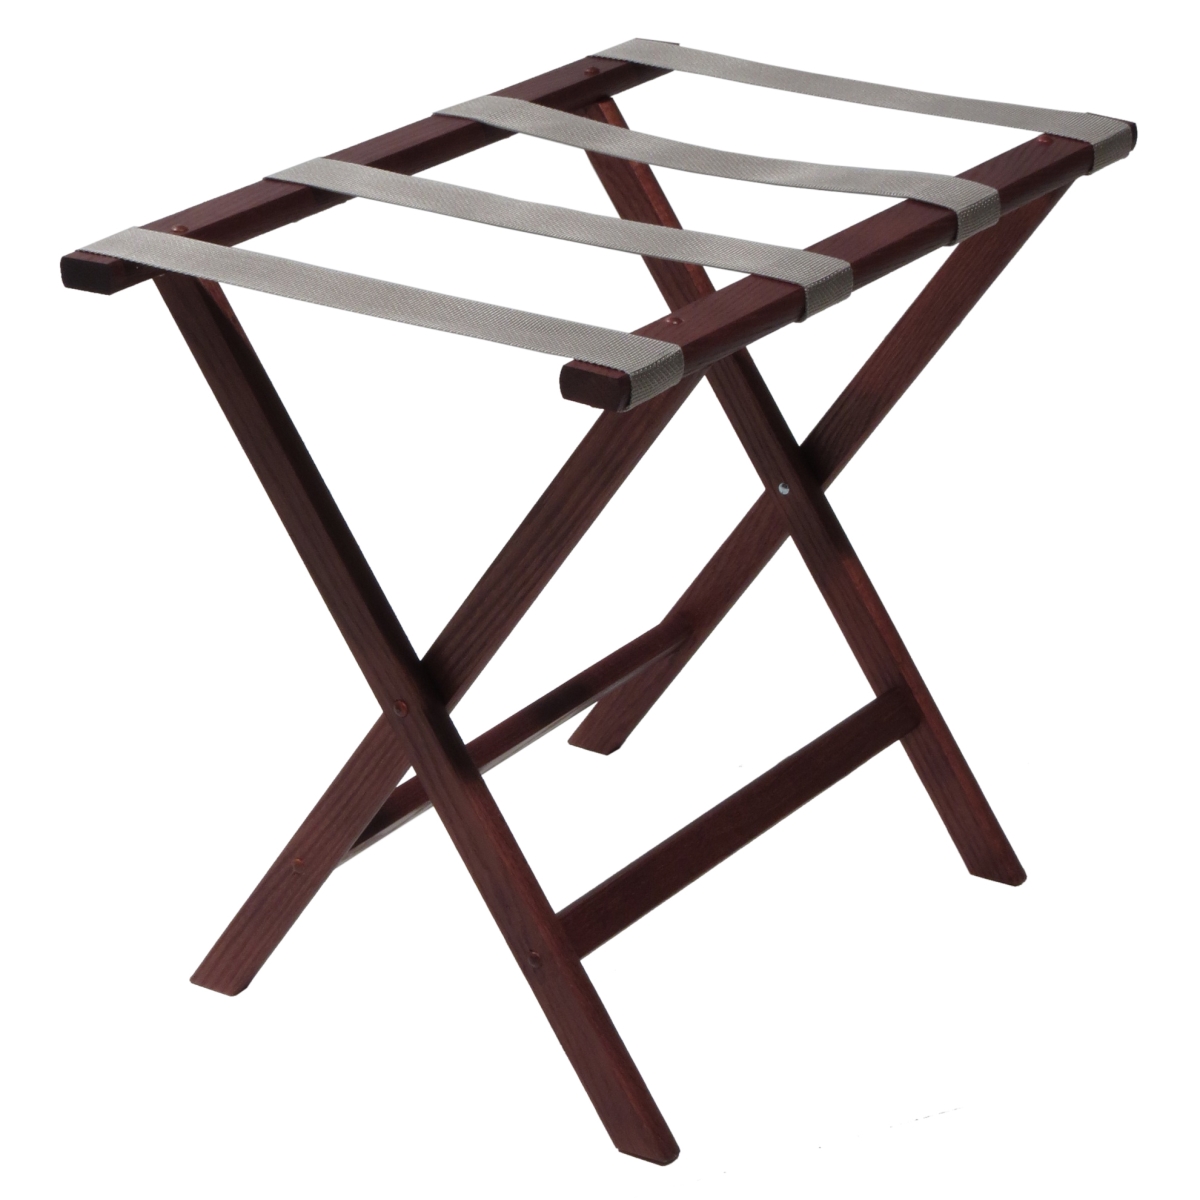 Wooden Mallet LR-MHGRY Deluxe Straight Leg Luggage Rack with Gray Straps - Mahogany